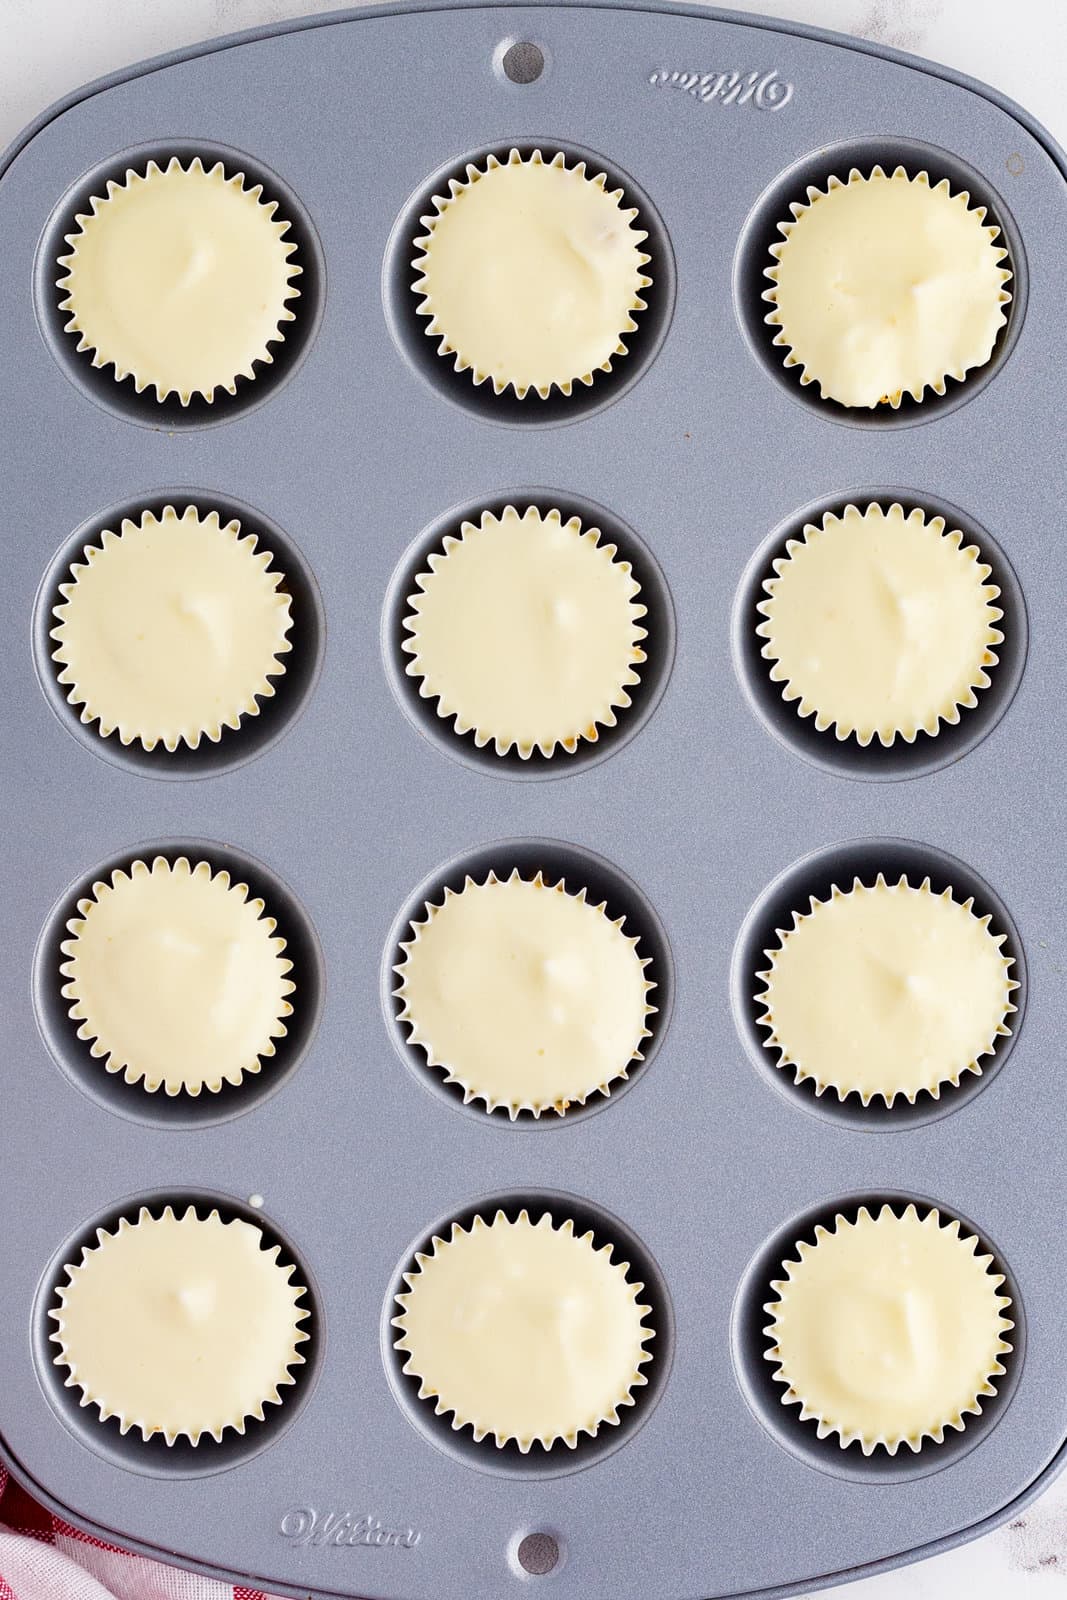 Finished mini cheesecakes in pan.